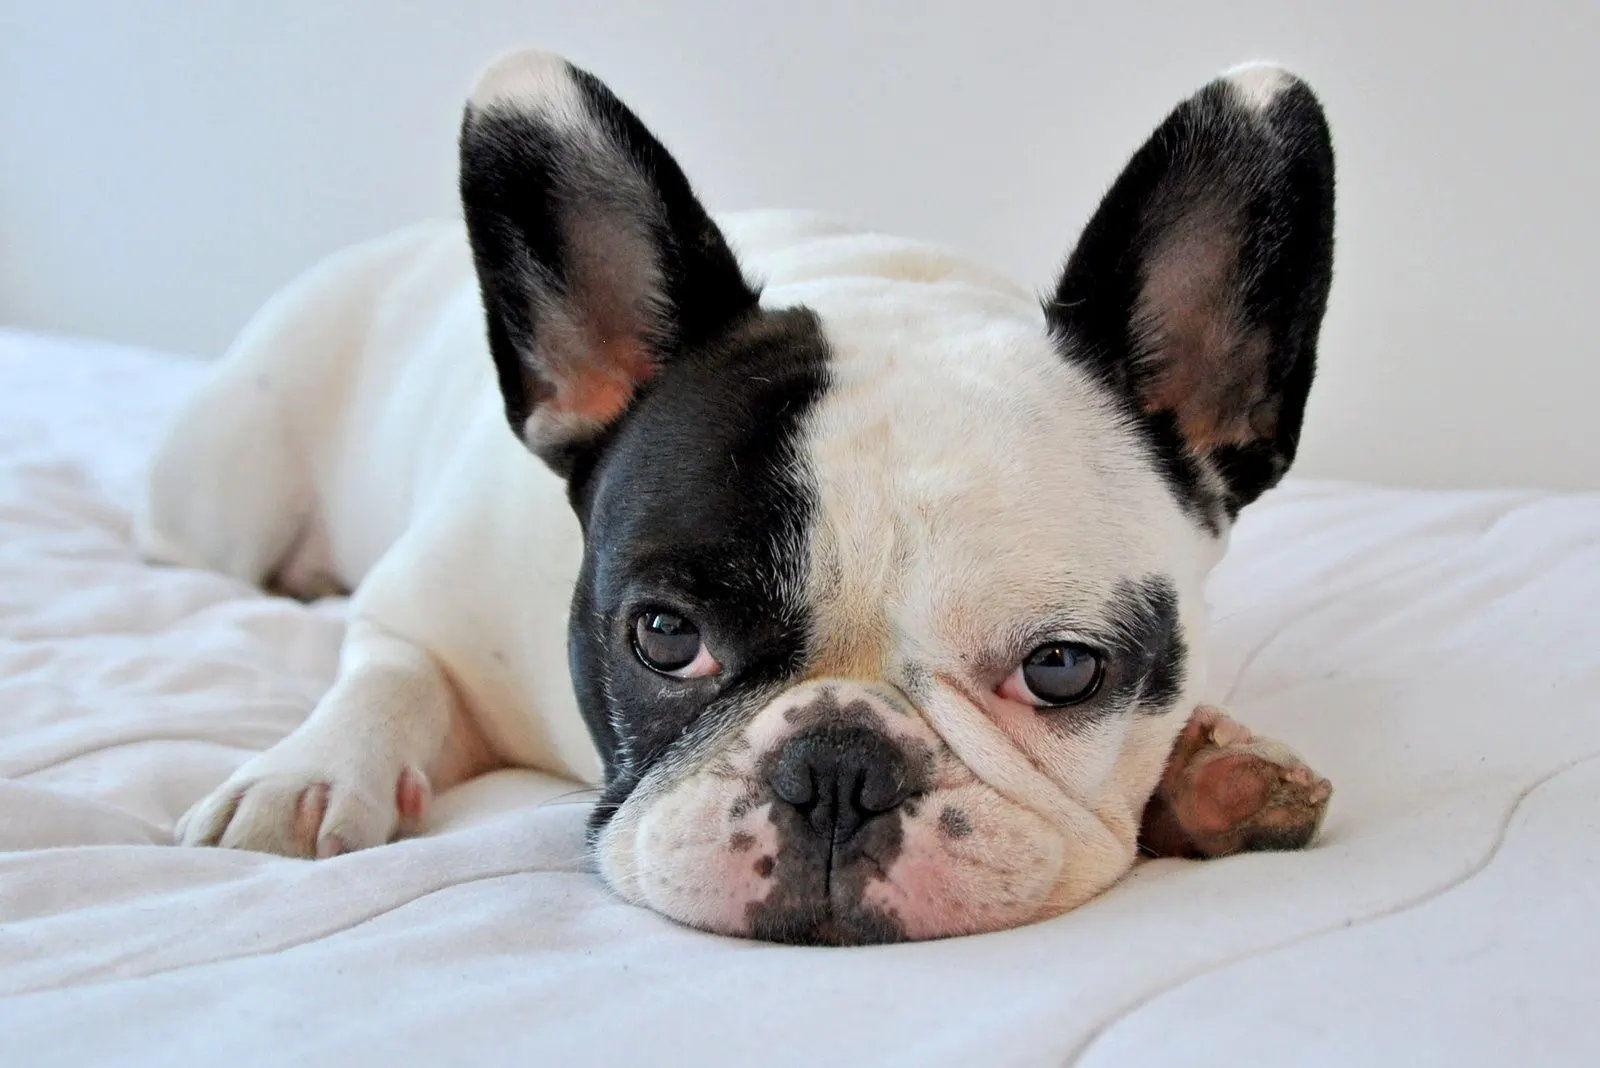 A pied colored French Bulldog rests comfortably on a bed